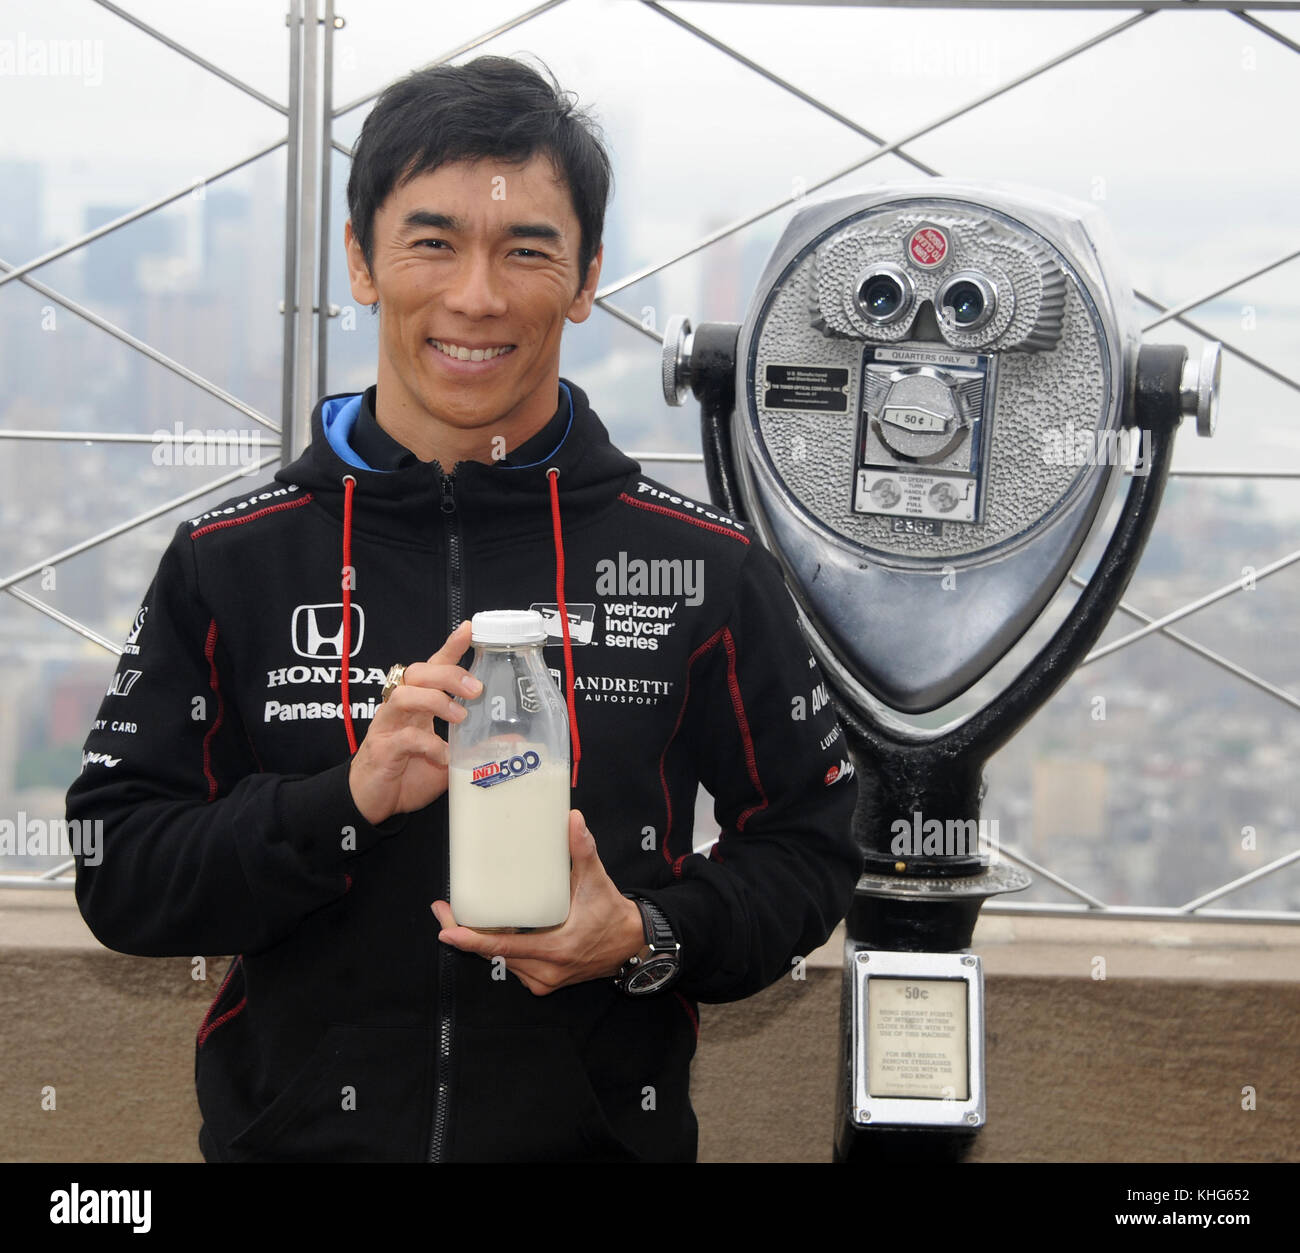 NEW YORK, NY - MAY 30: Indy driver Takuma Sato at The Empire State Building. Takuma Sato, winner of the 101st running of the Indianapolis 500 and driver of the #26 Ruoff Home Mortgage Honda, will visit the Empire State Building following his victory in Sunday’s historic race. Sato became the first Japanese driver to win “The Greatest Spectacle in Racing” when he edged three-time Indy 500 winner Helio Castroneves to the finish line by 0.2011 of a second. His victory marked the fifth overall and second consecutive Indy 500 win for Andretti Autosport on May 30, 2017 in New York City.    People:   Stock Photo